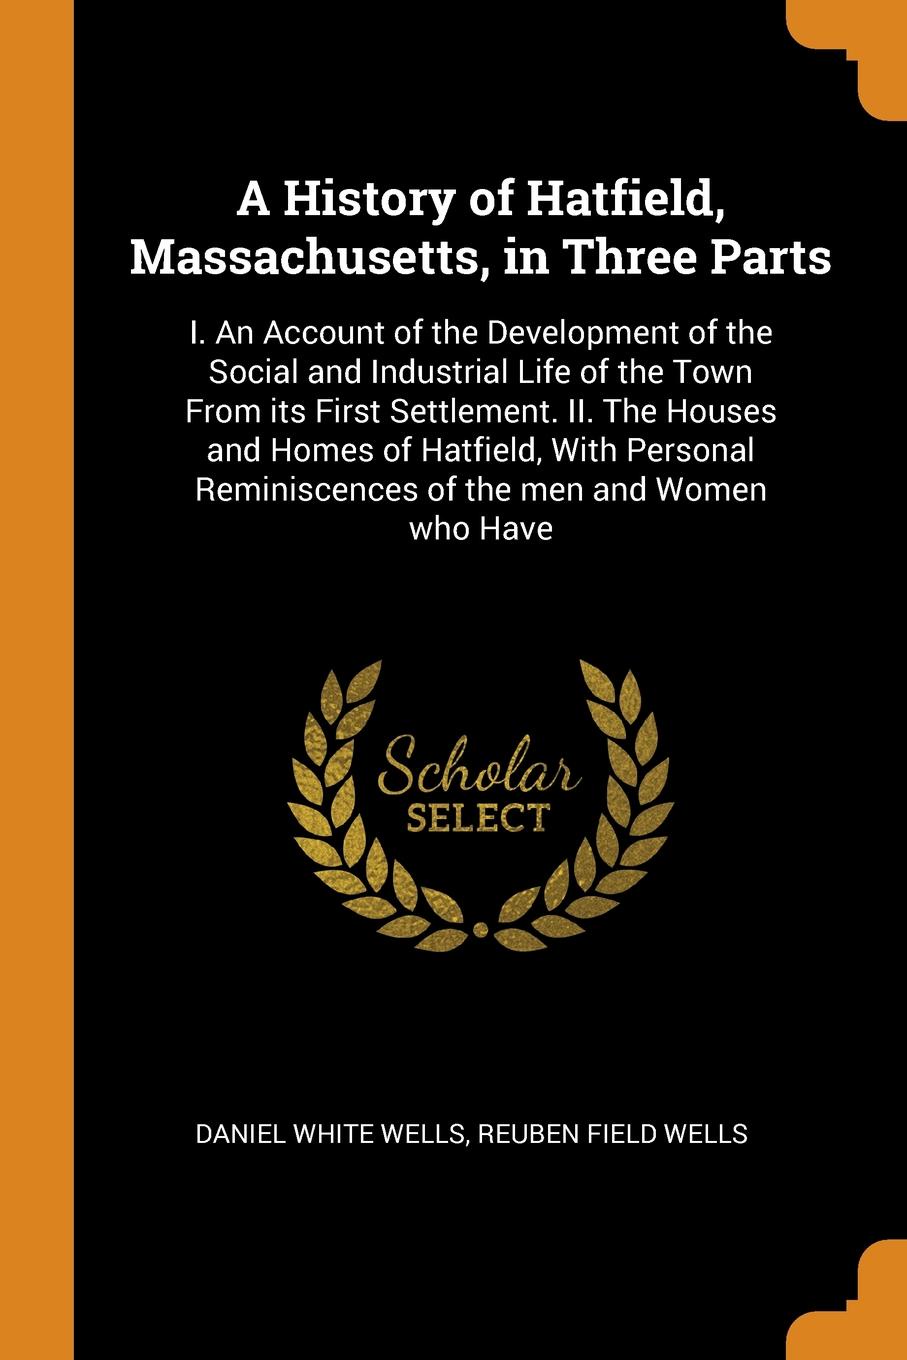 A History of Hatfield, Massachusetts, in Three Parts. I. An Account of the Development of the Social and Industrial Life of the Town From its First Settlement. II. The Houses and Homes of Hatfield, With Personal Reminiscences of the men and Women ...